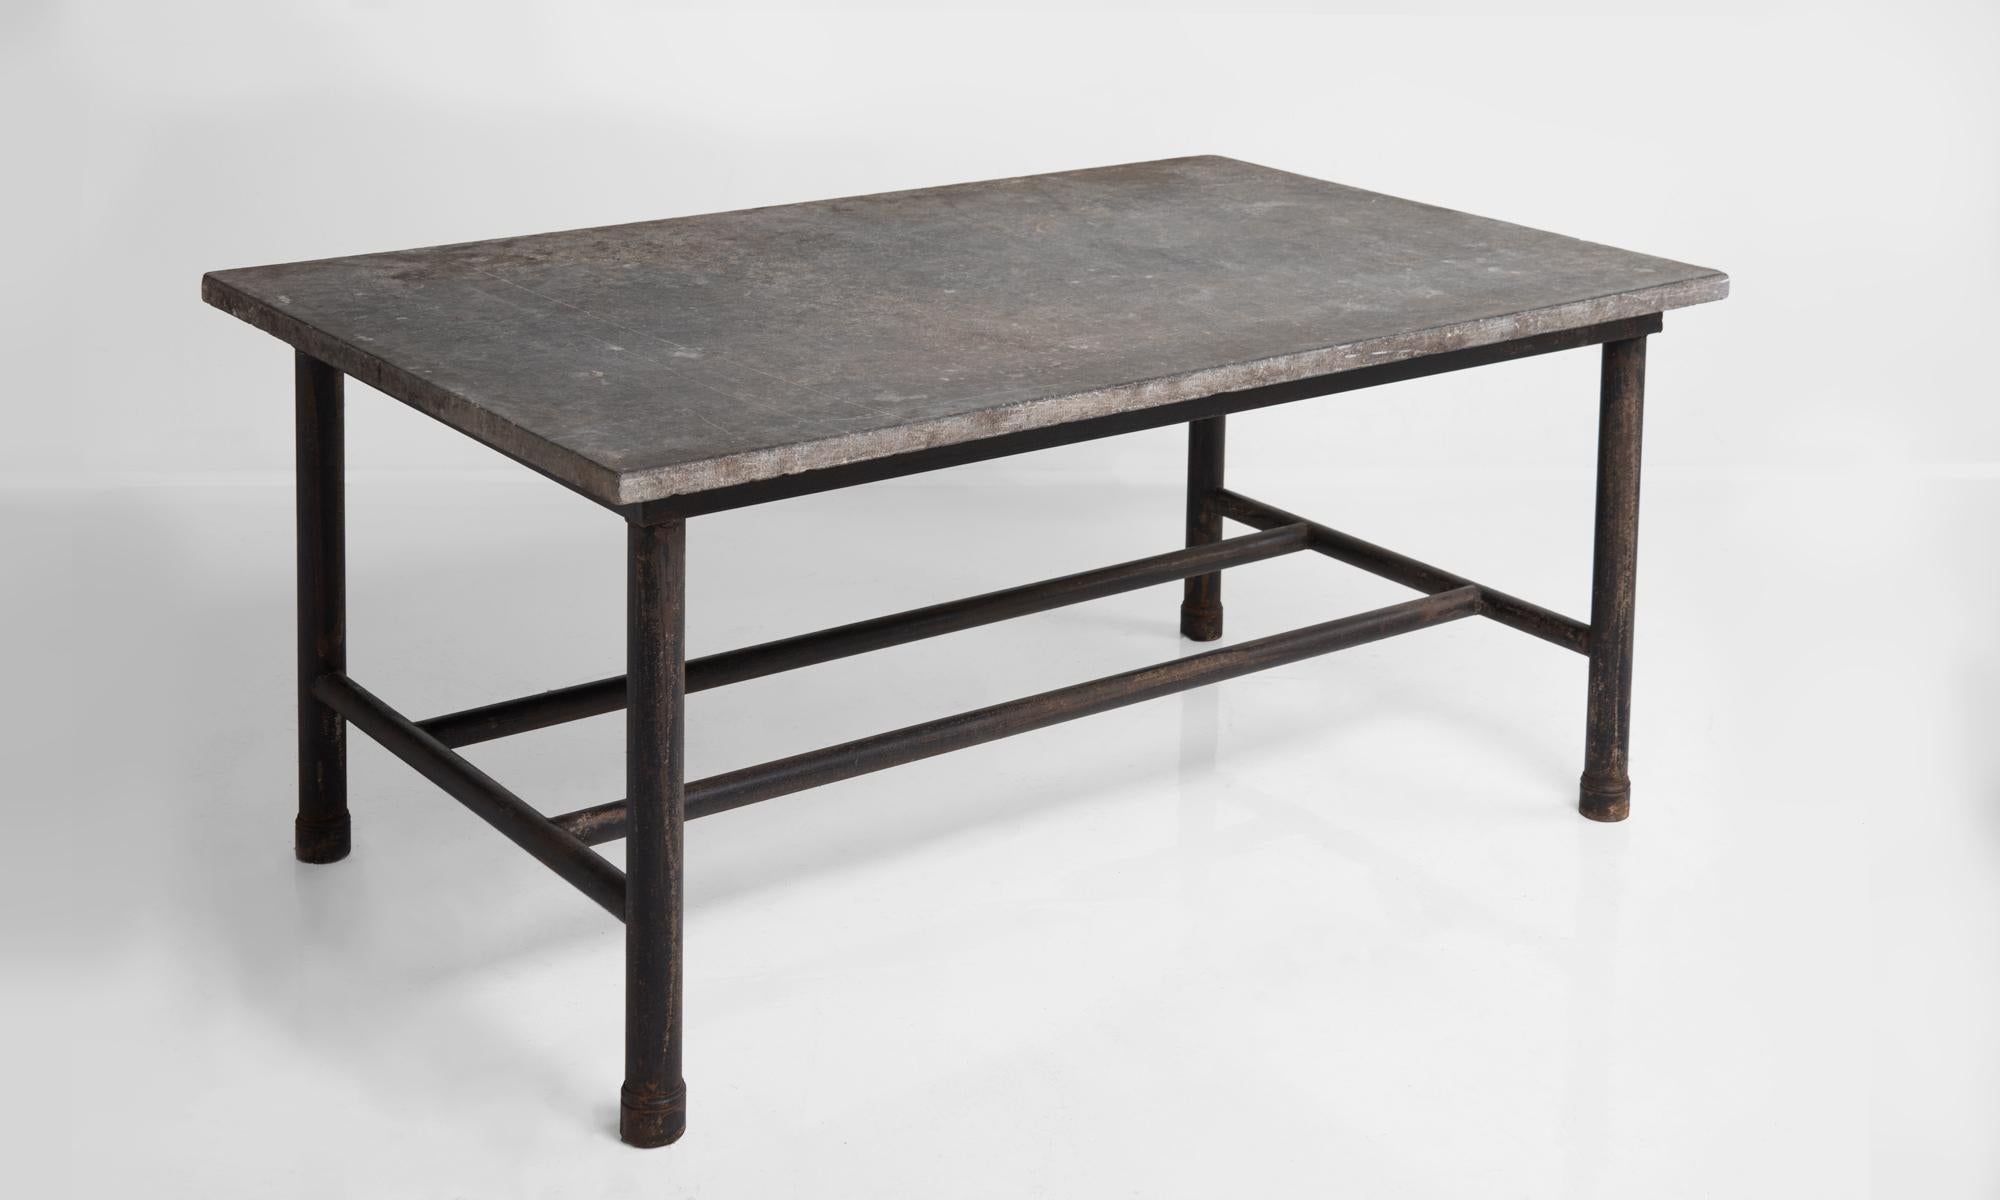 Slate top and metal work table, France, circa 1930.

Wonderful industrial form with cylindrical legs and stretchers and beautifully patinated stone top.